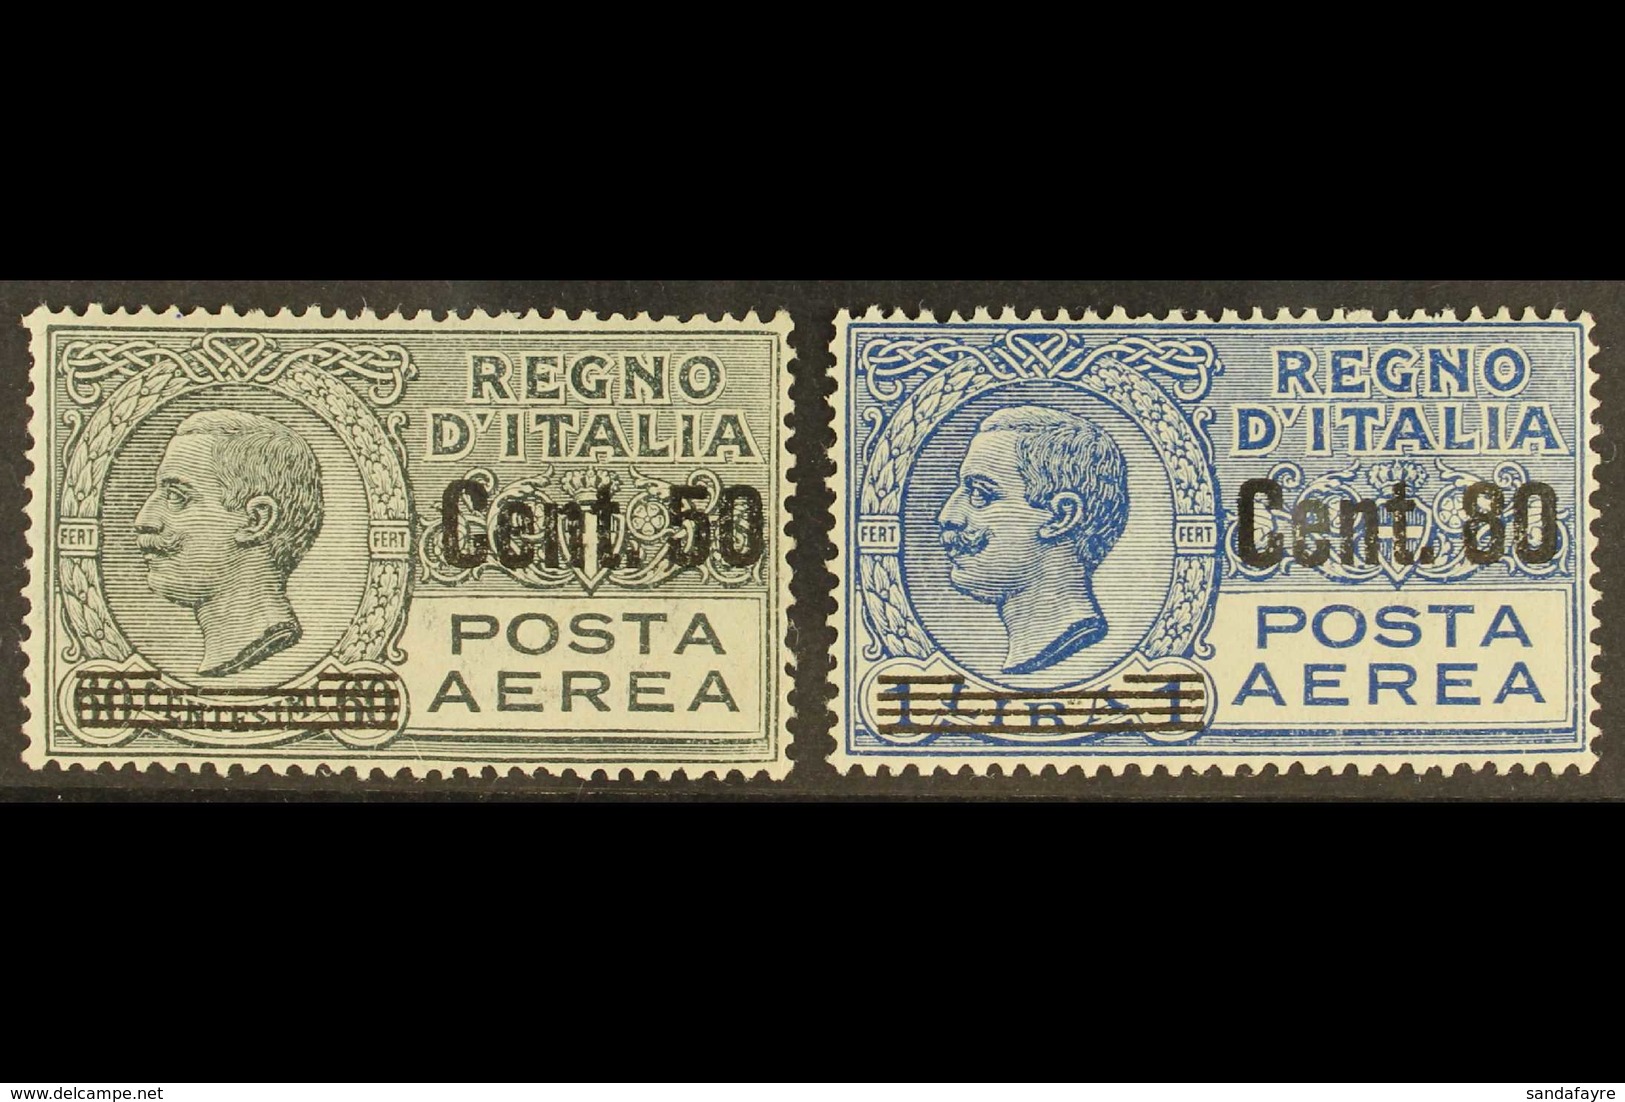 1927 AIRMAILS 50c On 60c Grey & 80c On 1l Blue, Sassone 8/9, Mi 270/1, Never Hinged Mint (2 Stamps). For More Images, Pl - Ohne Zuordnung